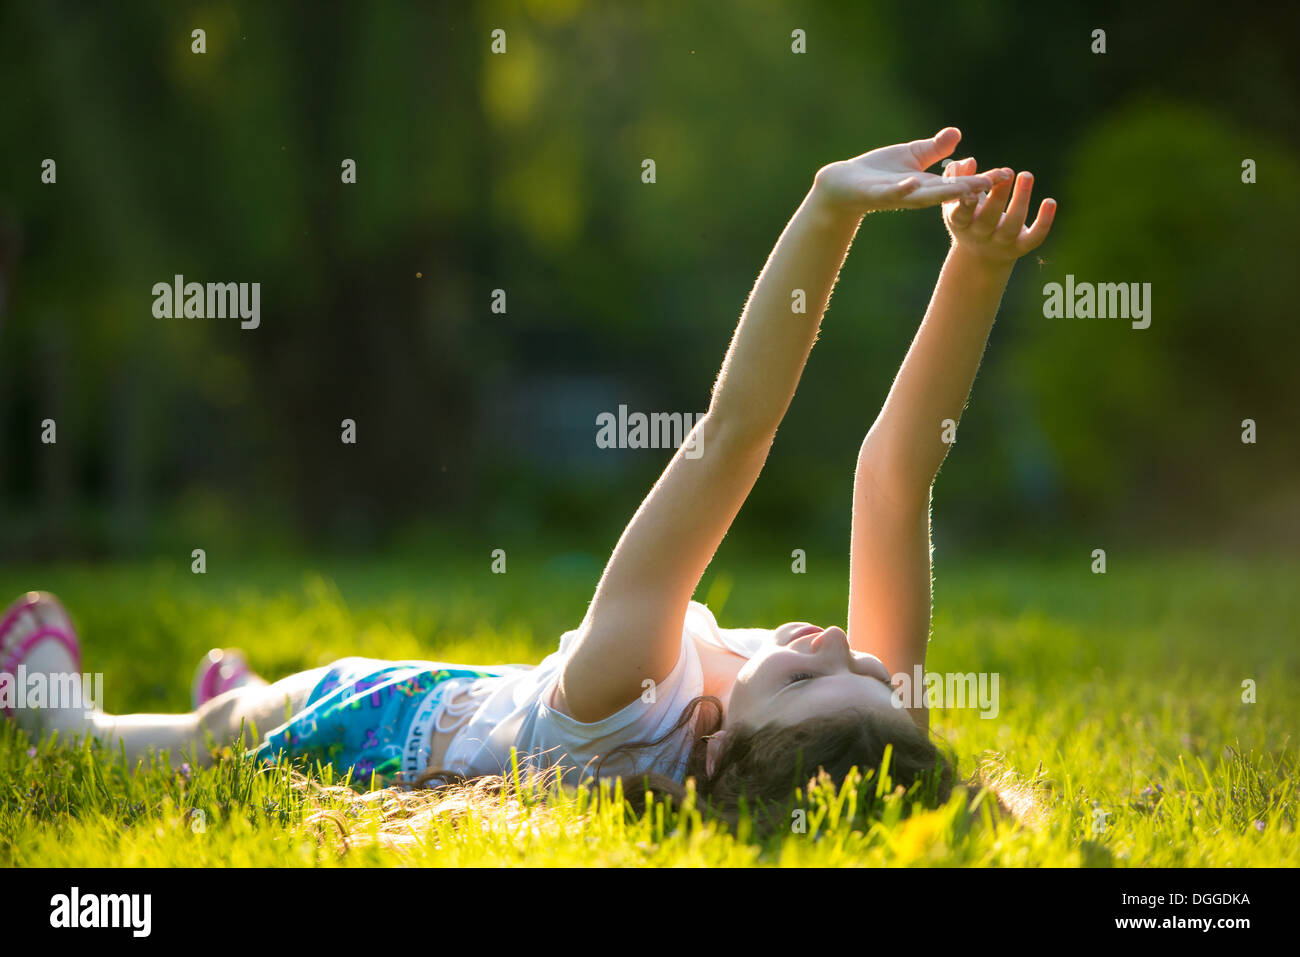 Girl lying on grass with arms raised Banque D'Images